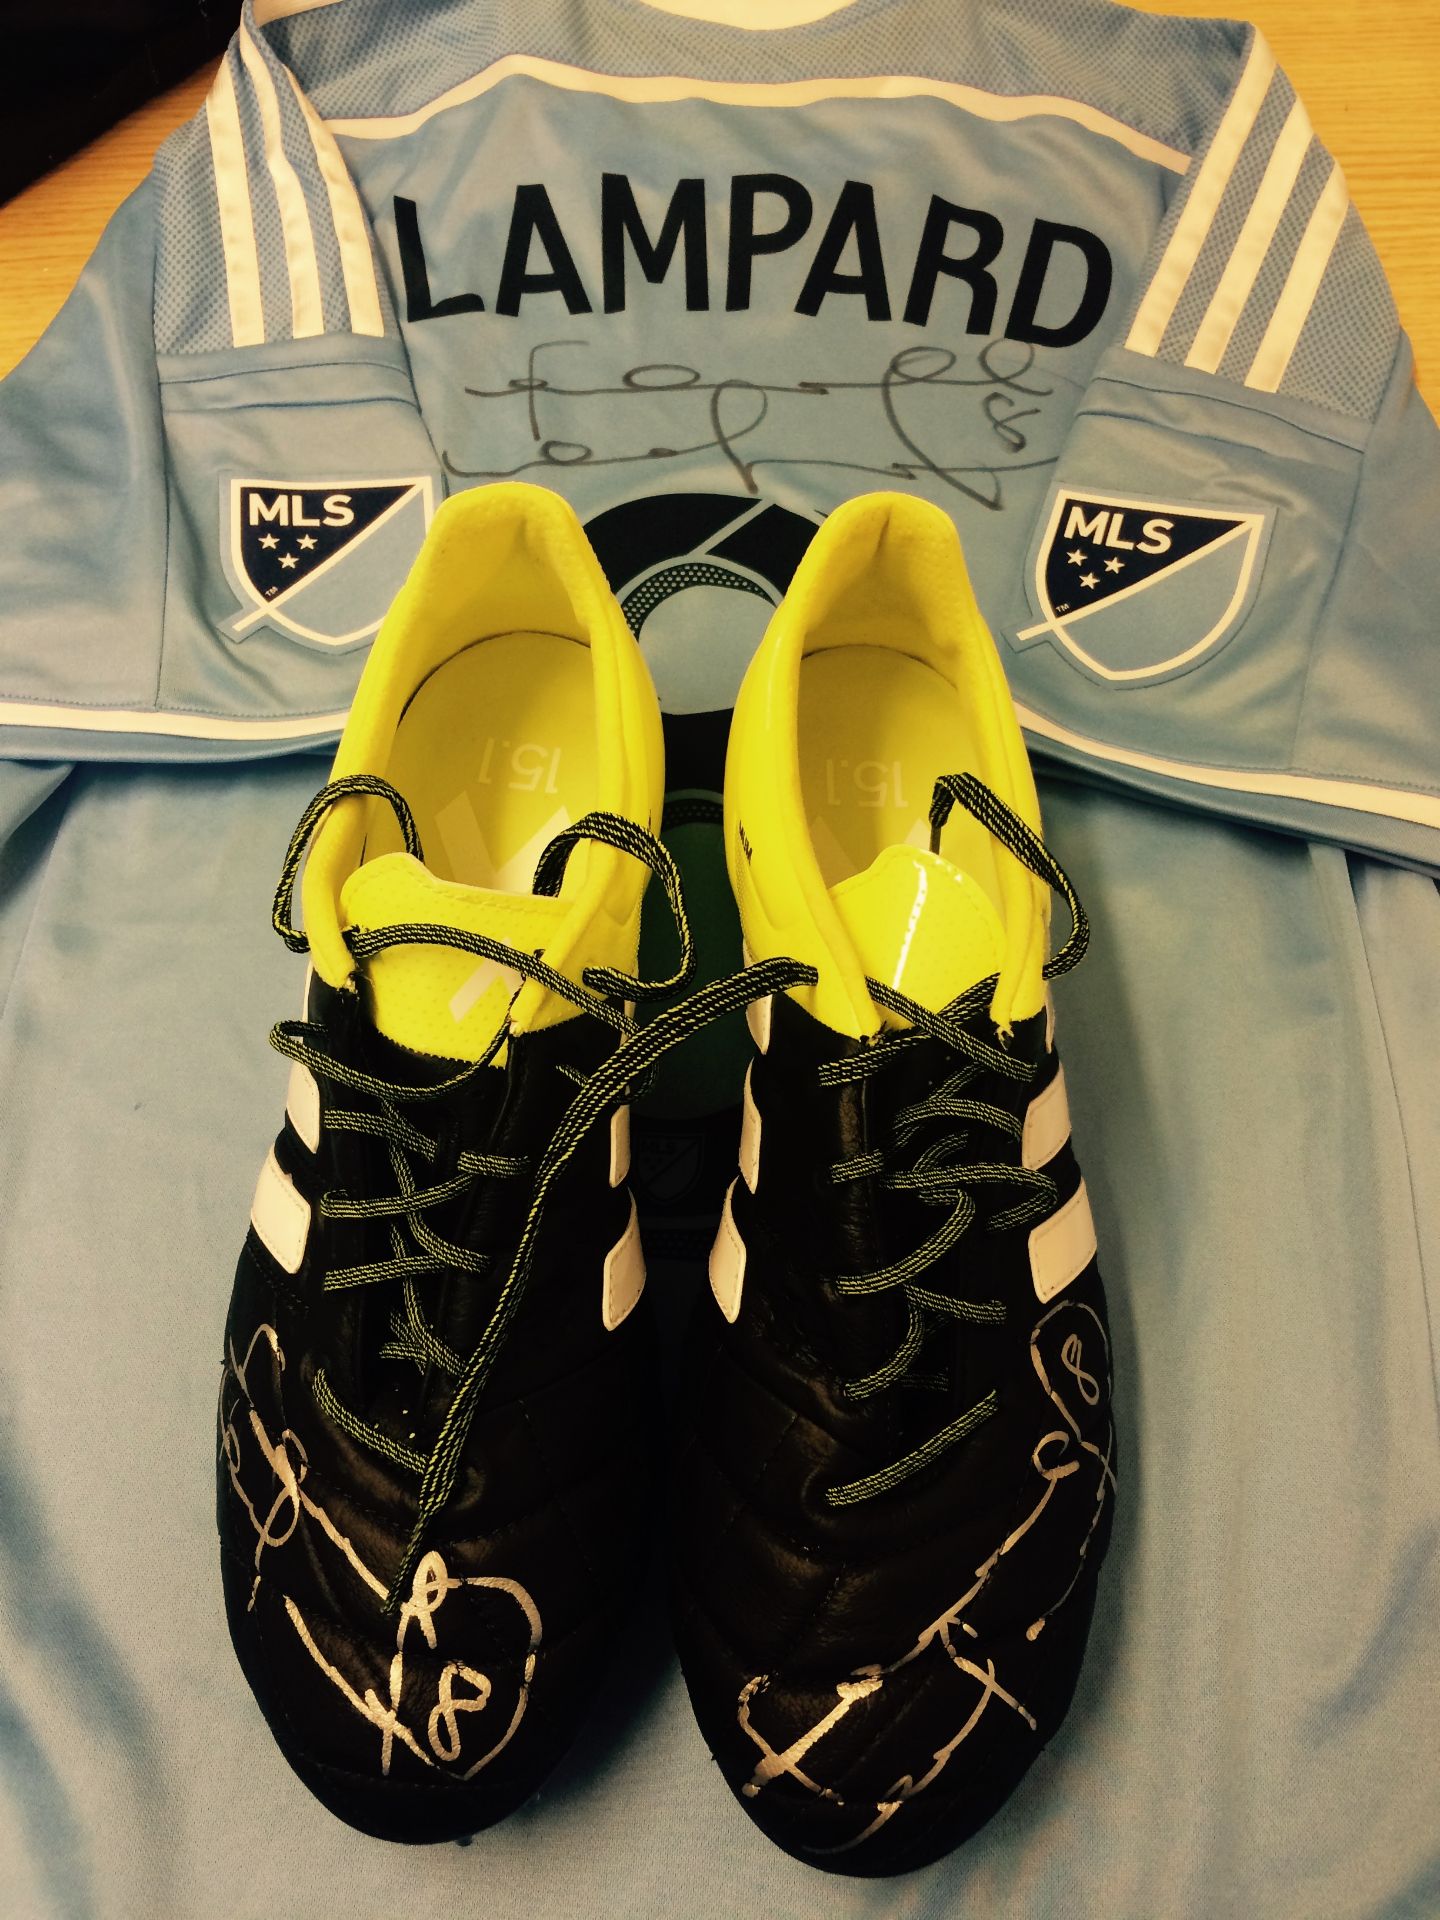 Football Legend Frank Lampard personally donates a signed shirt & boots - Image 3 of 12